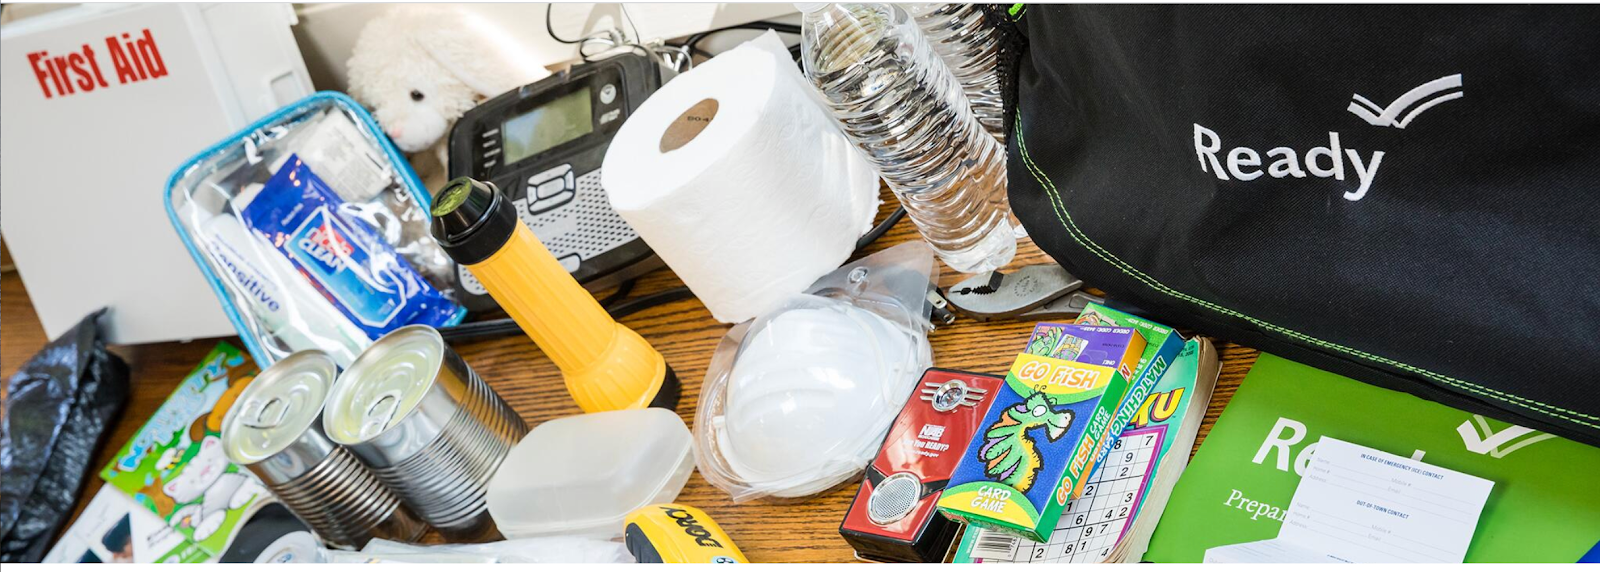 Picture of emergency supplies including a first-aid kit, canned food, toilet paper, bottled water, flashlight, batteries, and other items.